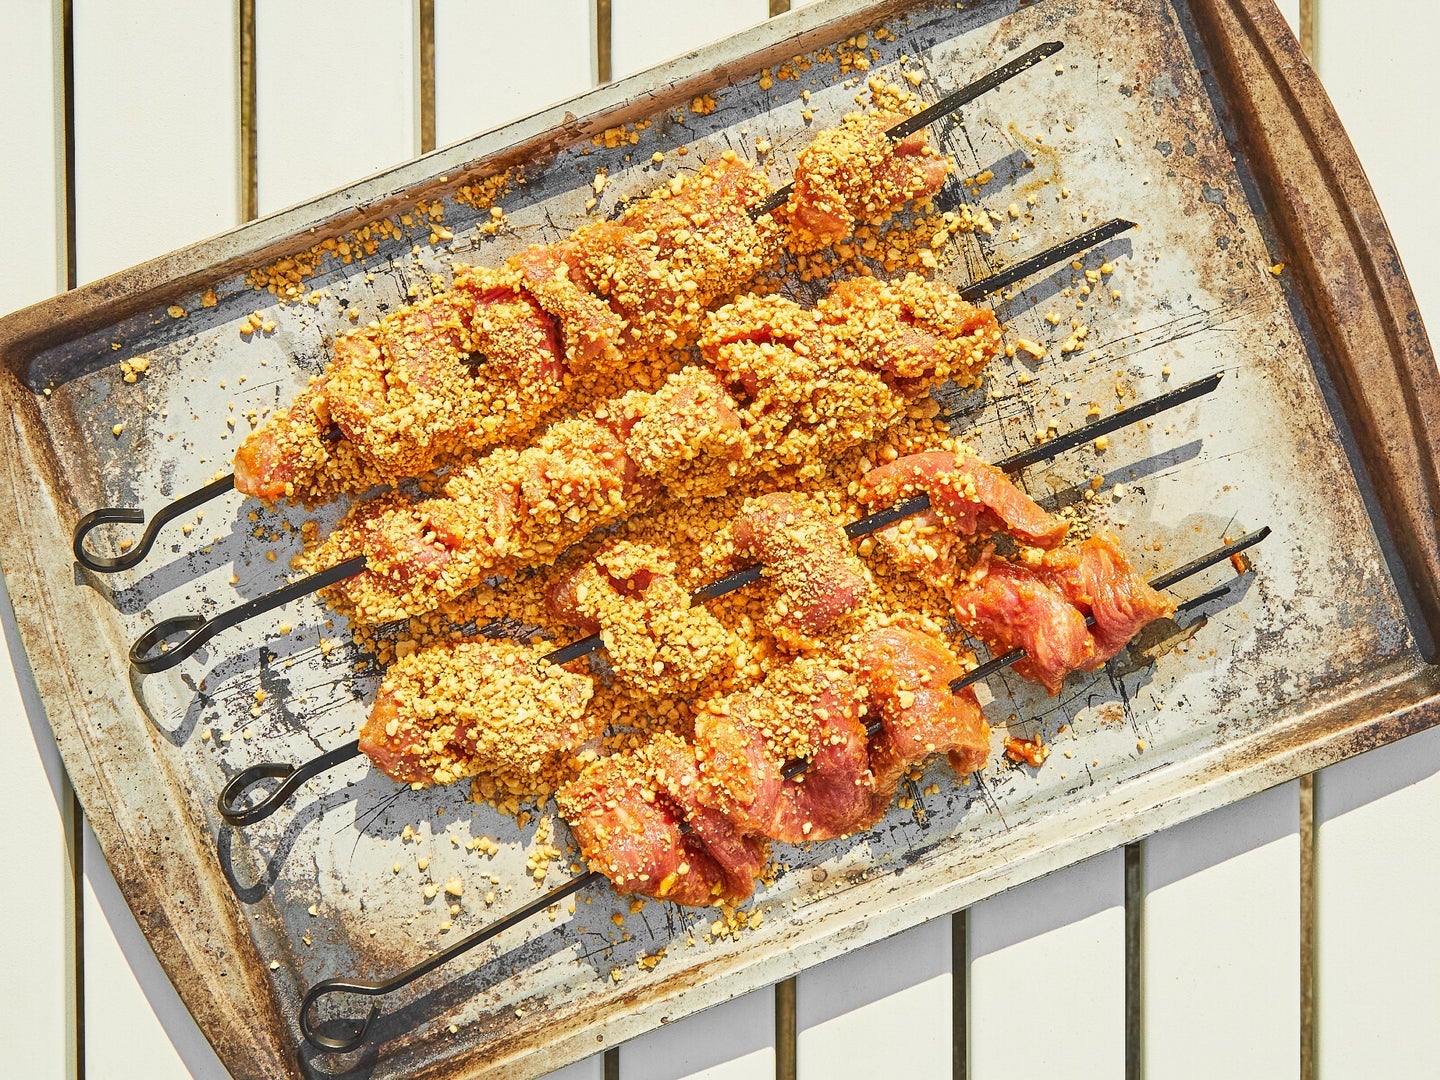 Grilled meat skewers on a baking sheet